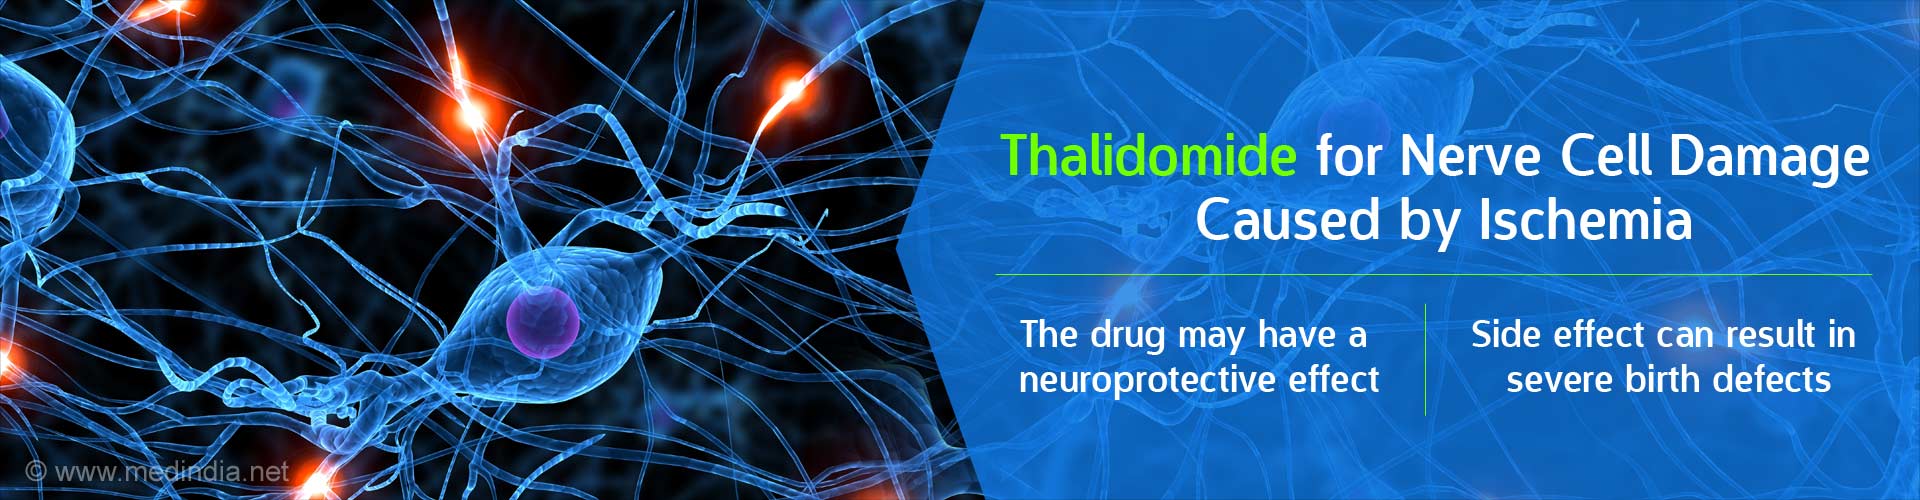 Thalidomide for nerve cell damage caused by ischemia
- the drug may have a neuroprotective effect
- side effect can result in severe birth defects
